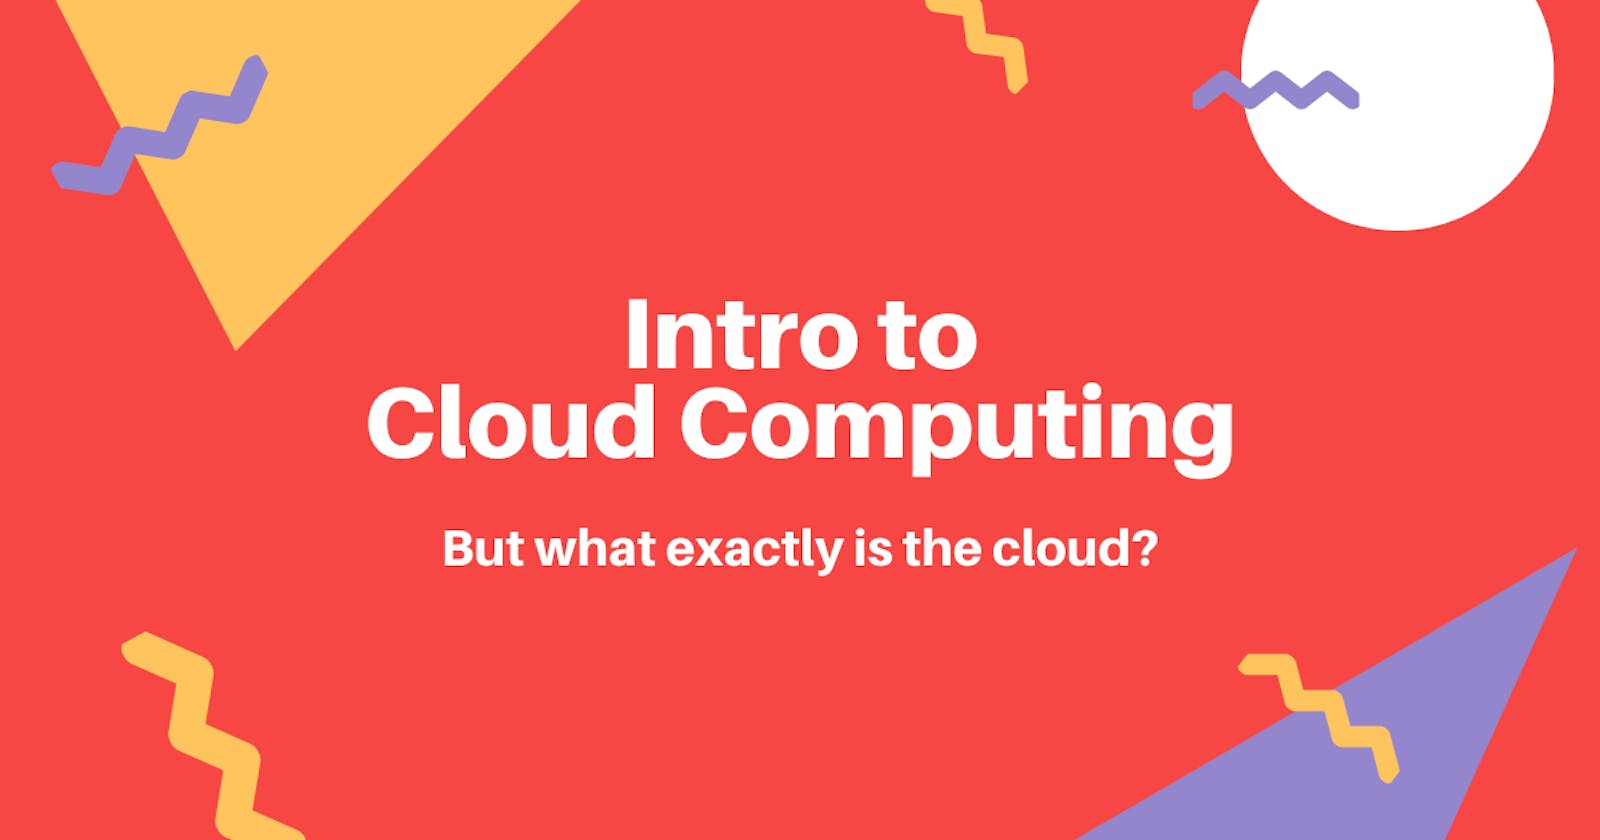 But what exactly is the cloud? (Part 1 of 2)